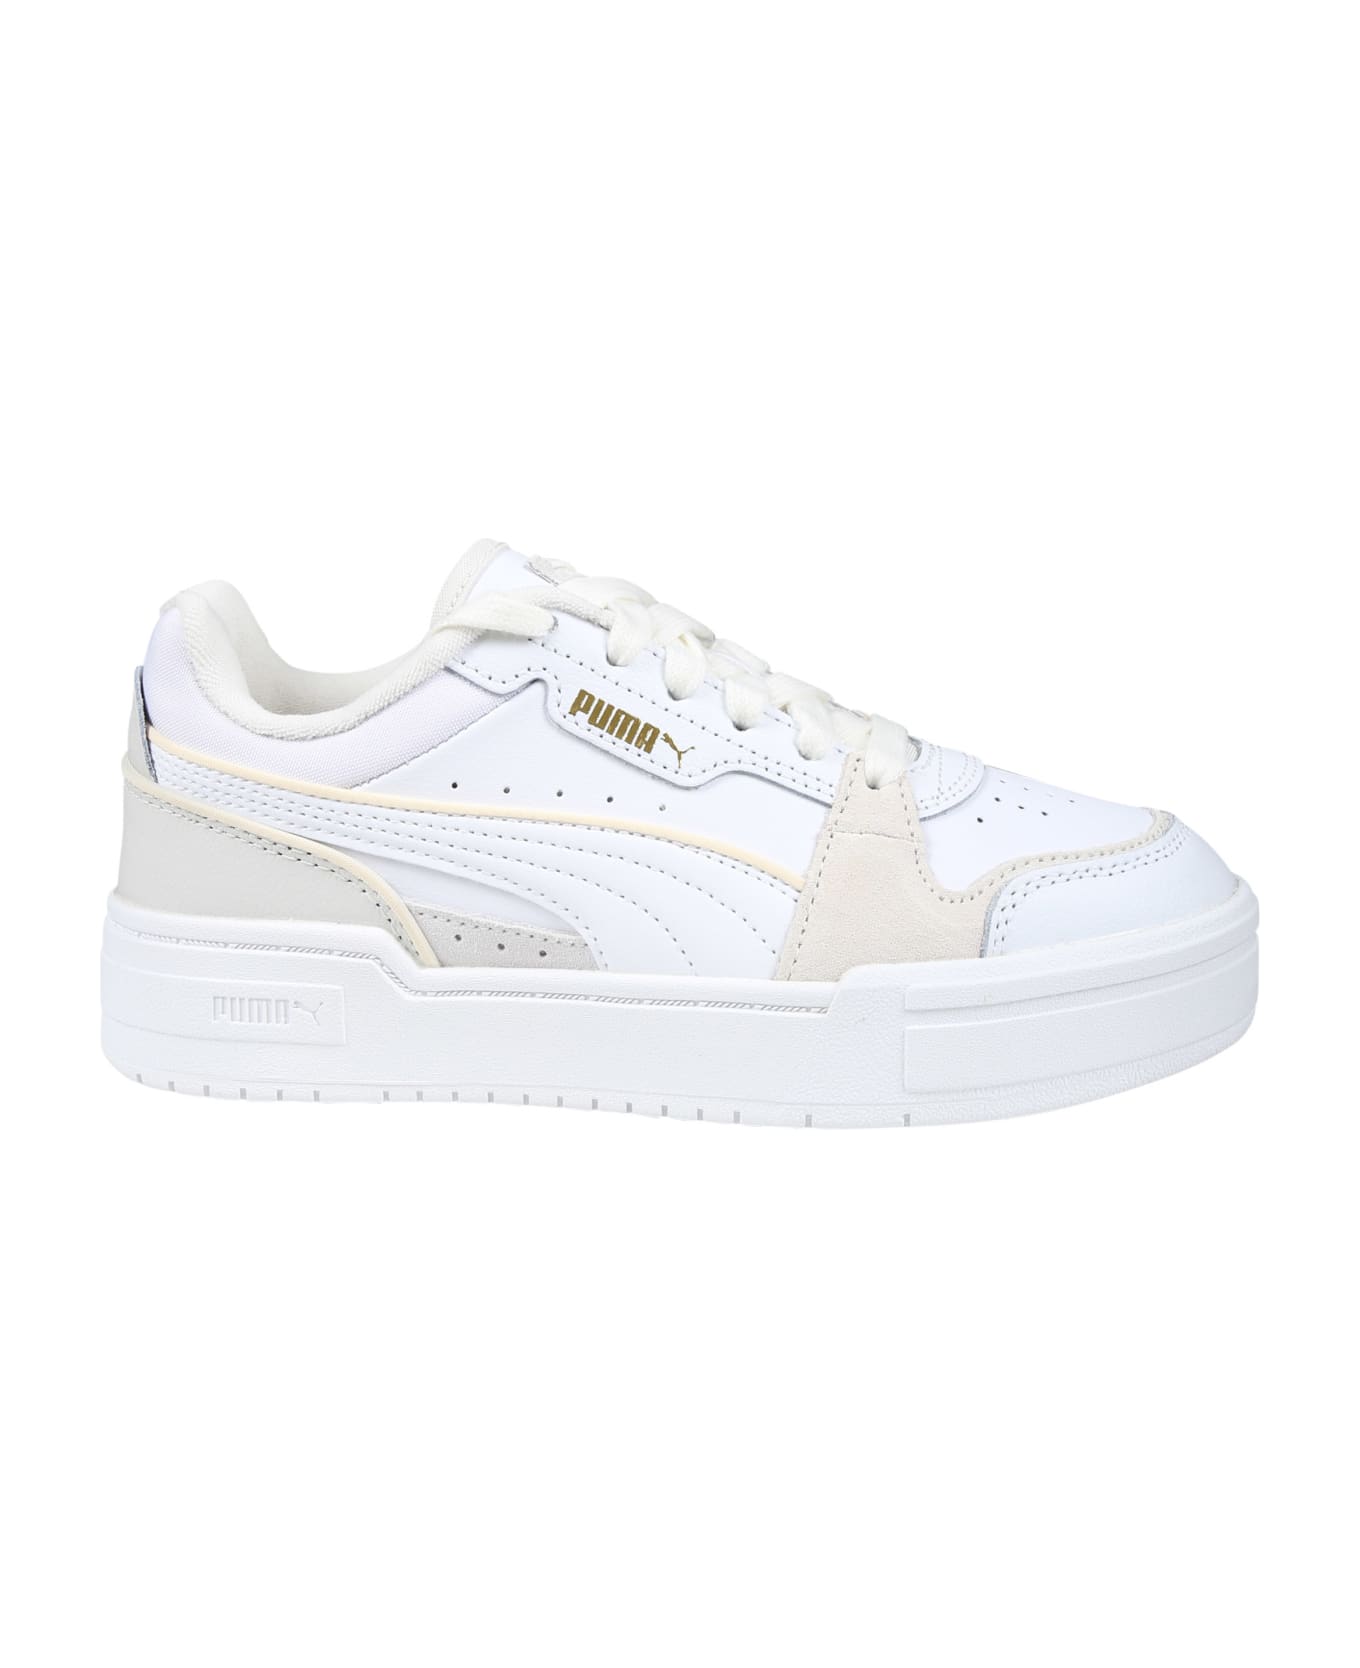 Puma Ca Pro Lux Iii White Low Sneakers For Kids - White シューズ